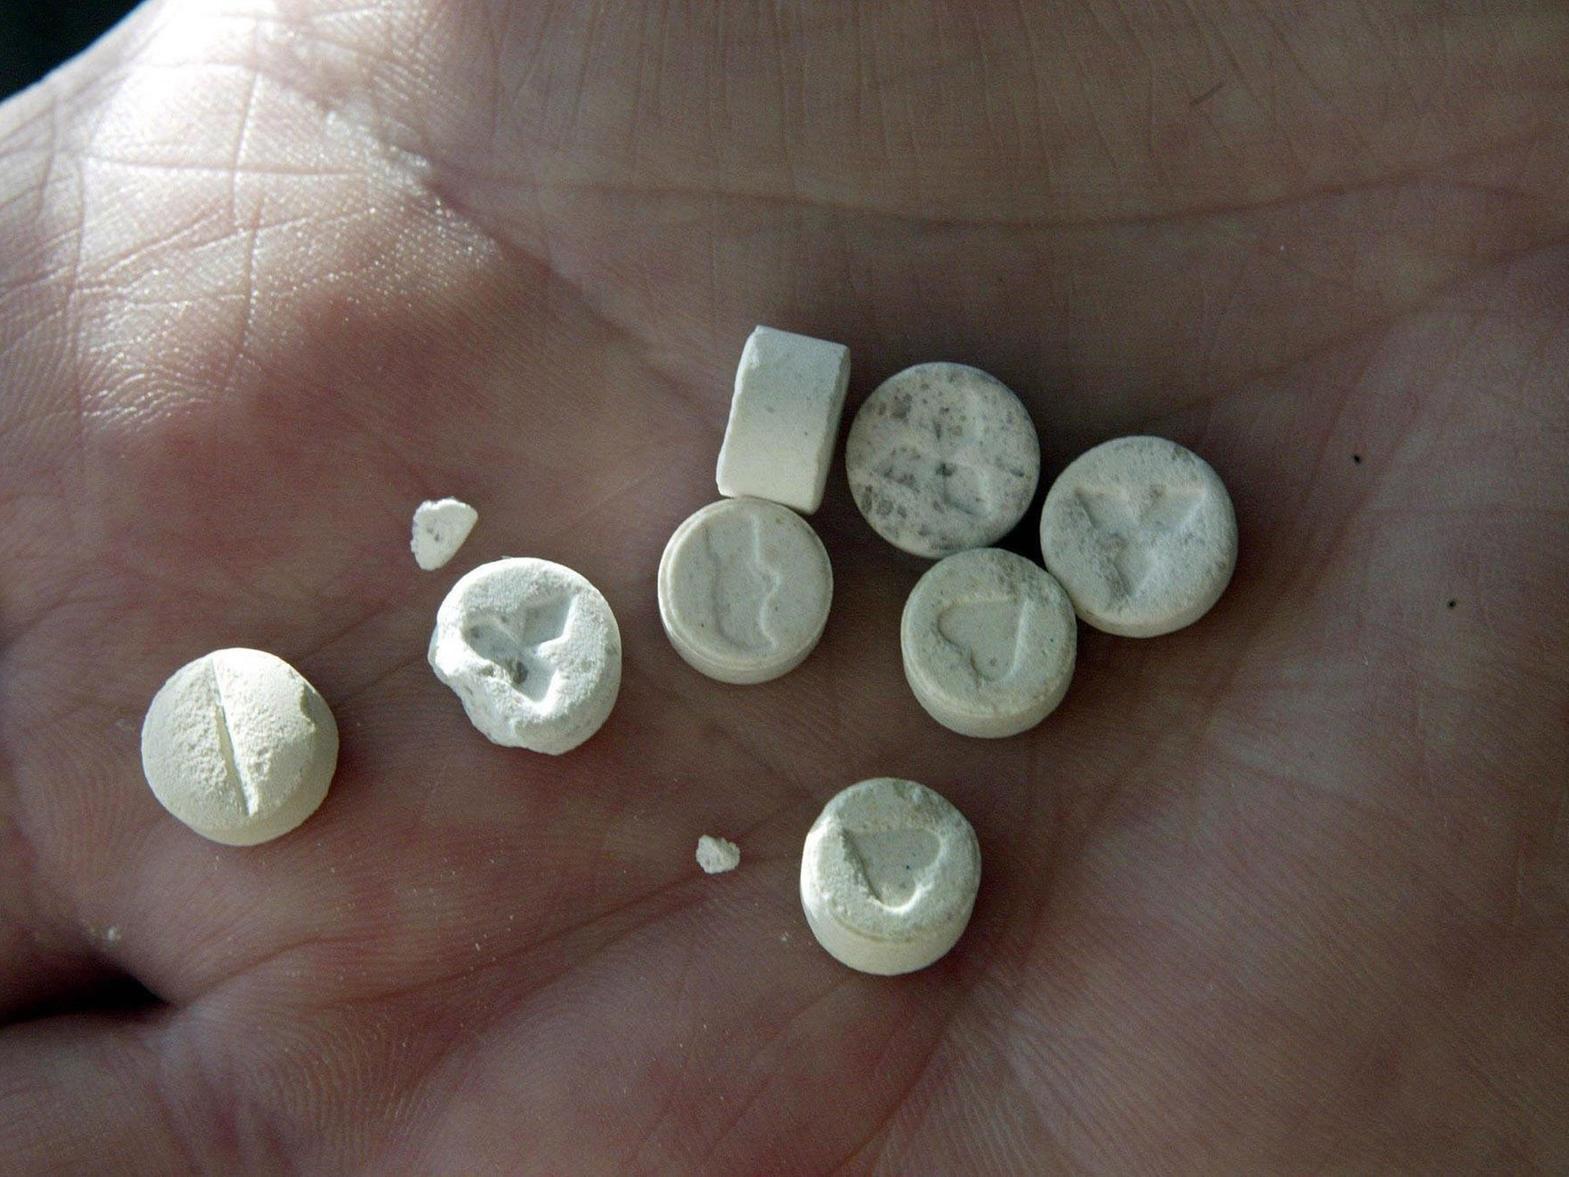 Police made 112 seizures of ecstasy, totalling 1,000 doses. Picture: Paul Faith/PA Wire